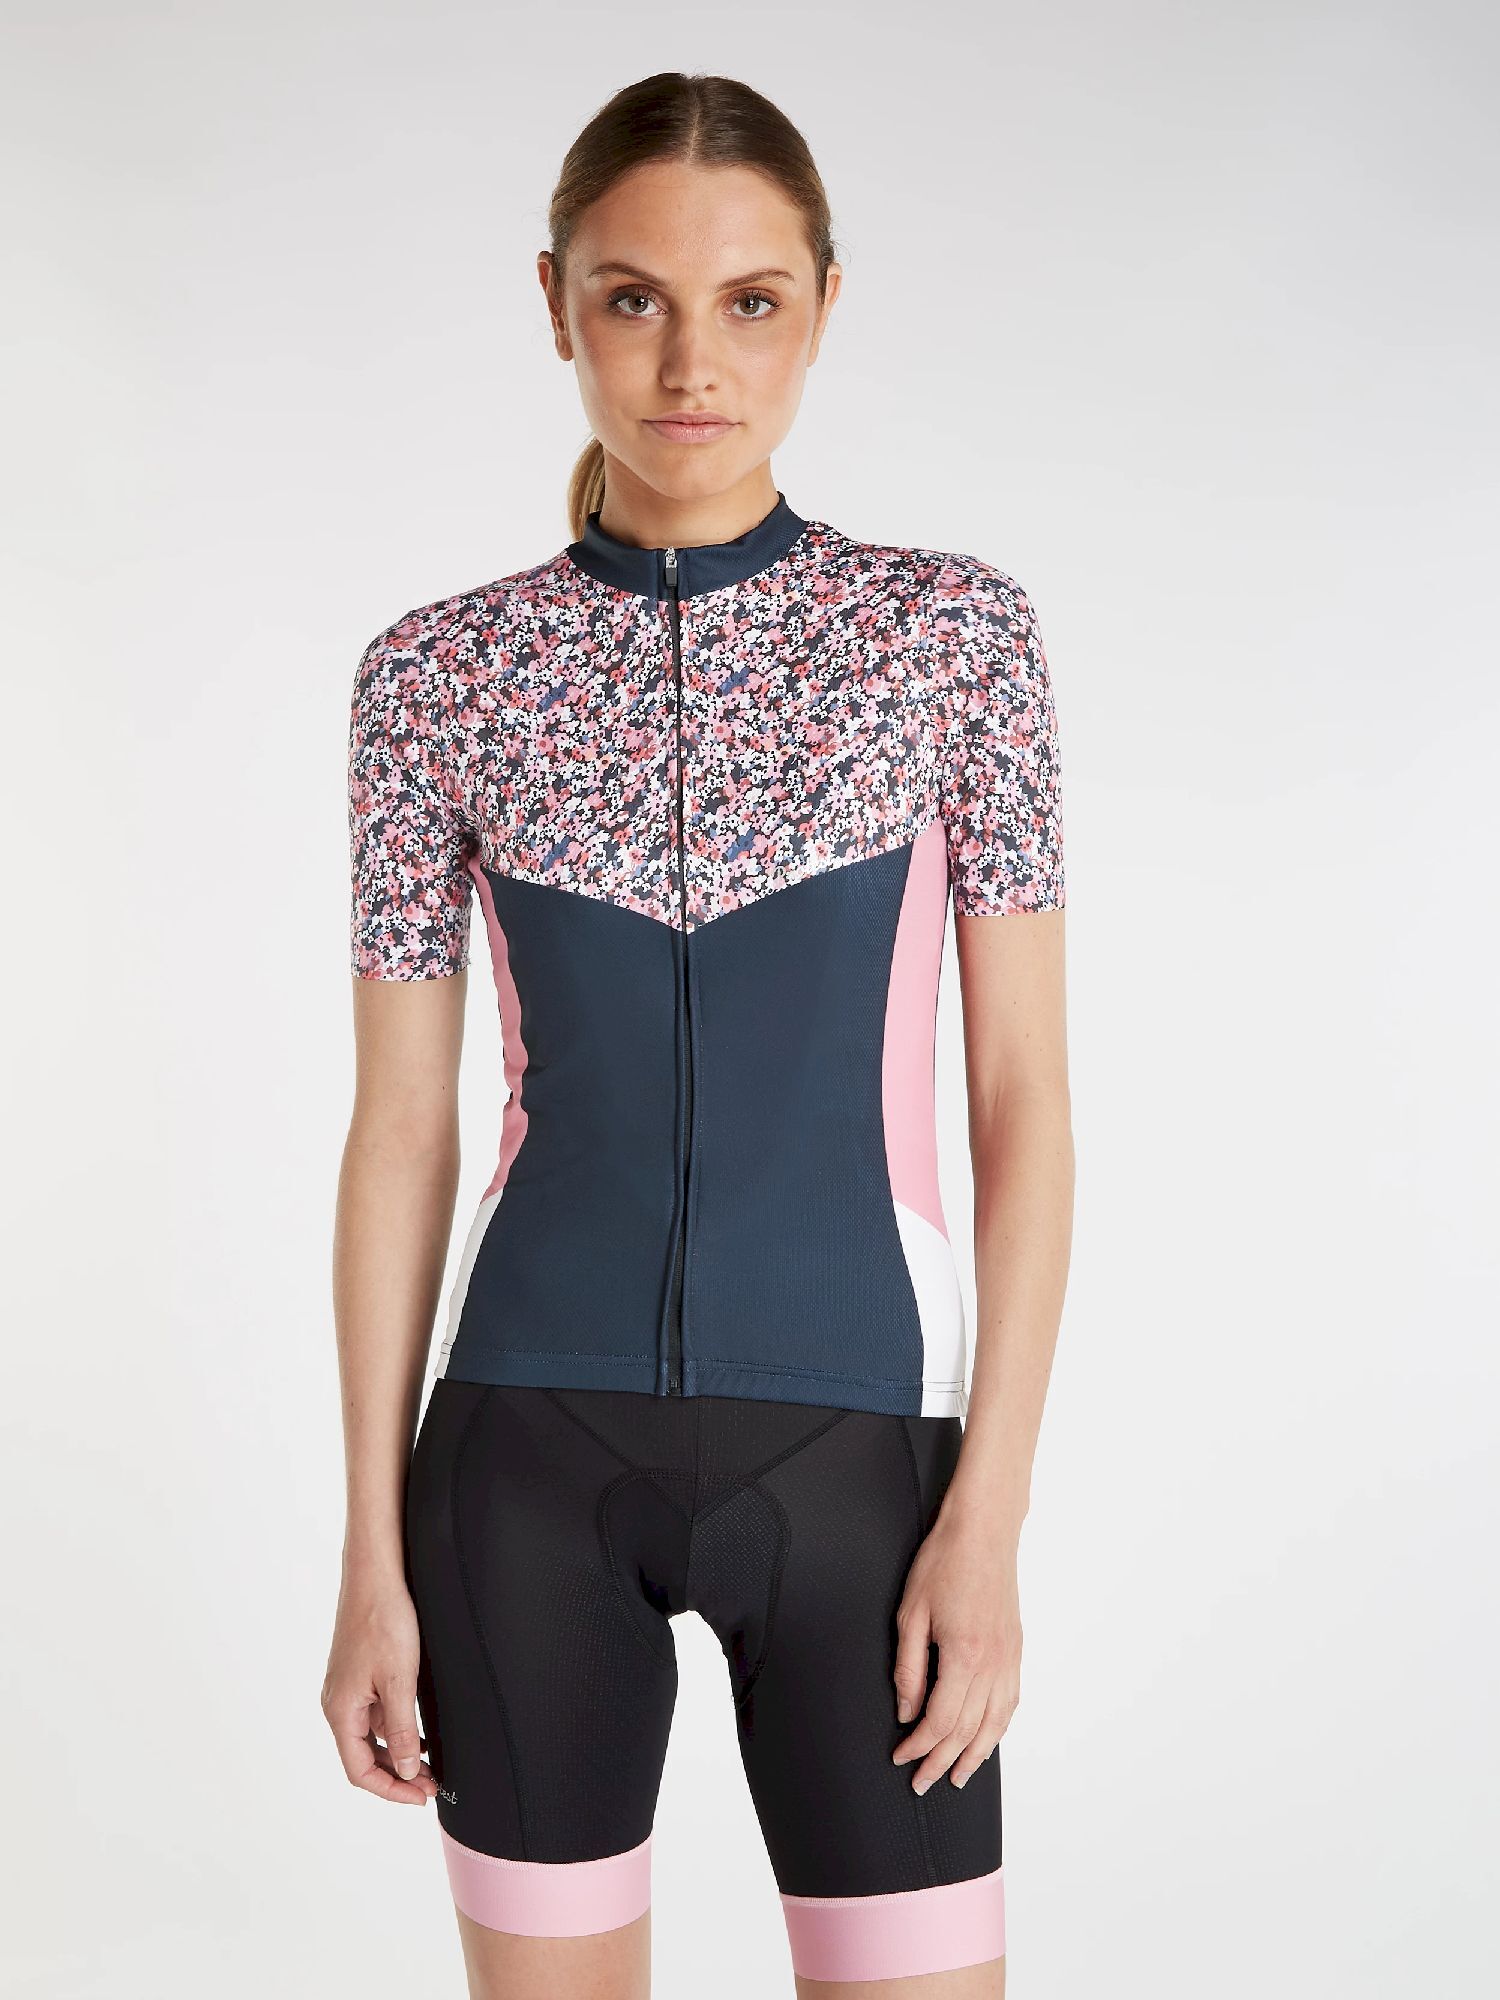 Protest Prtcacao - Maillot ciclismo - Mujer | Hardloop